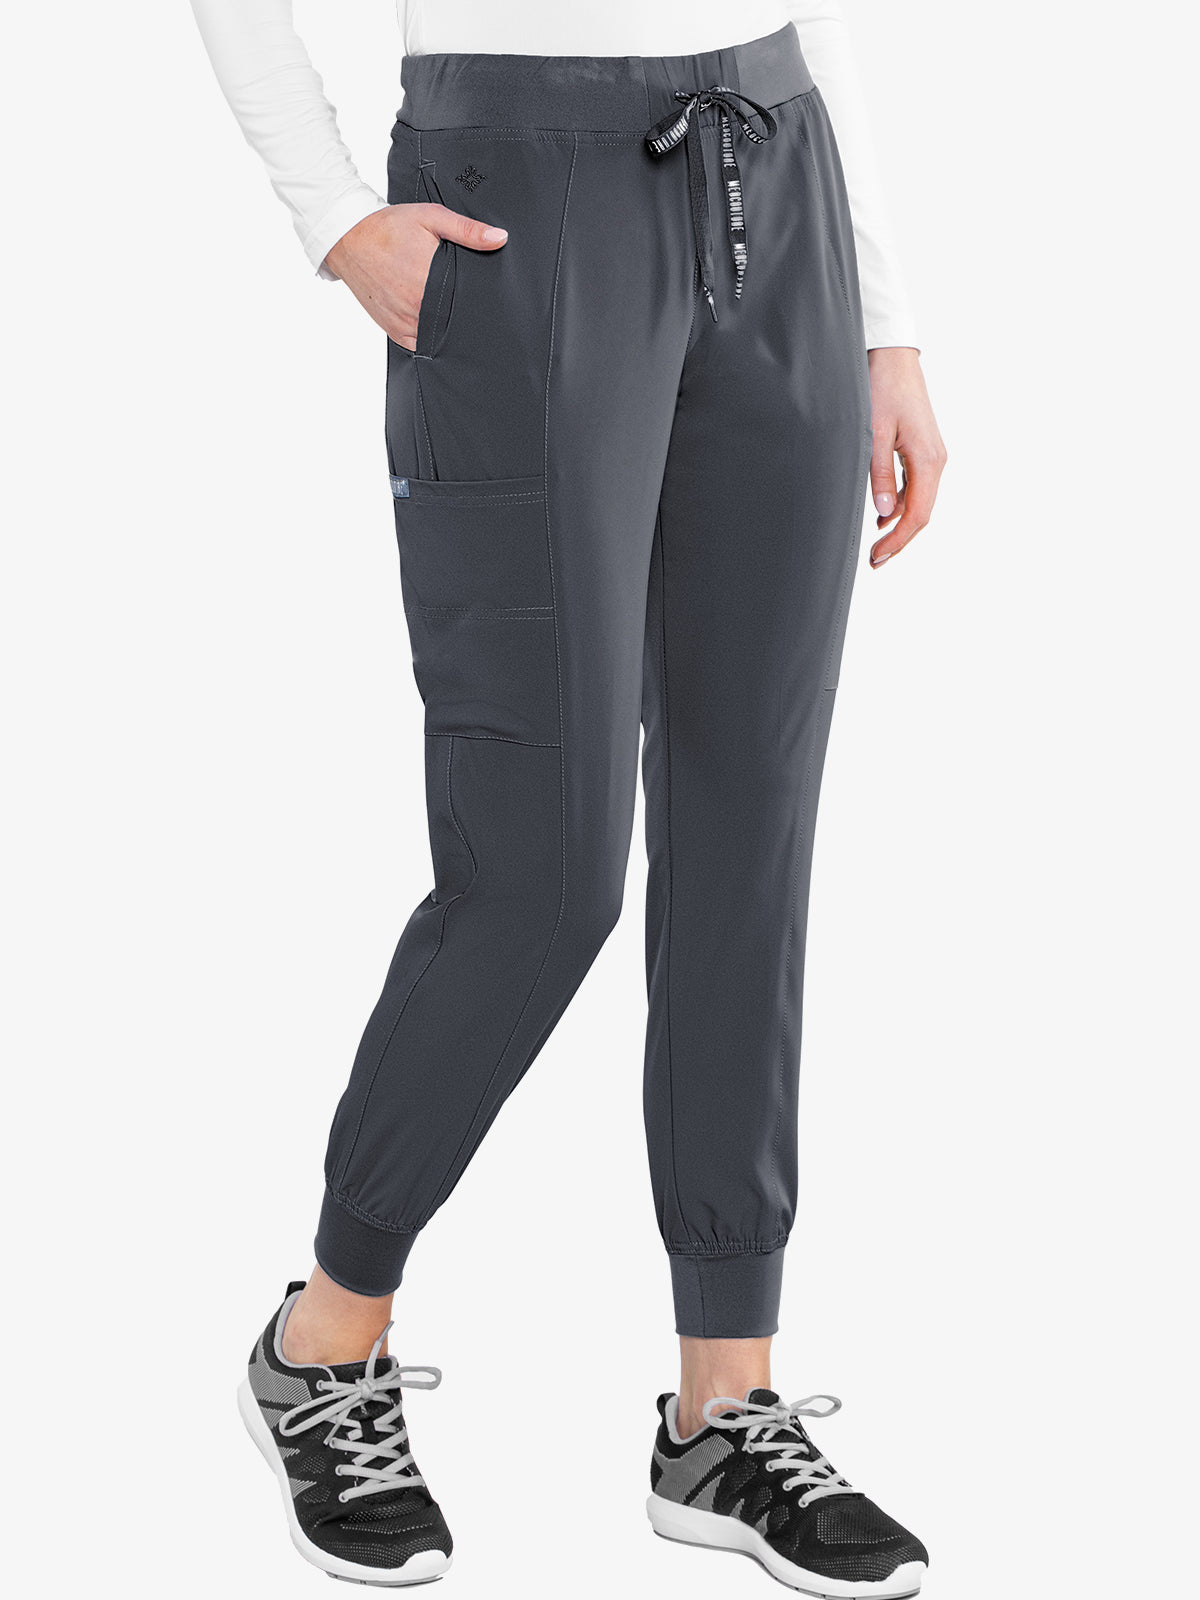 Med Couture Peaches 8721 Seamed Jogger Scrub Pant pewter